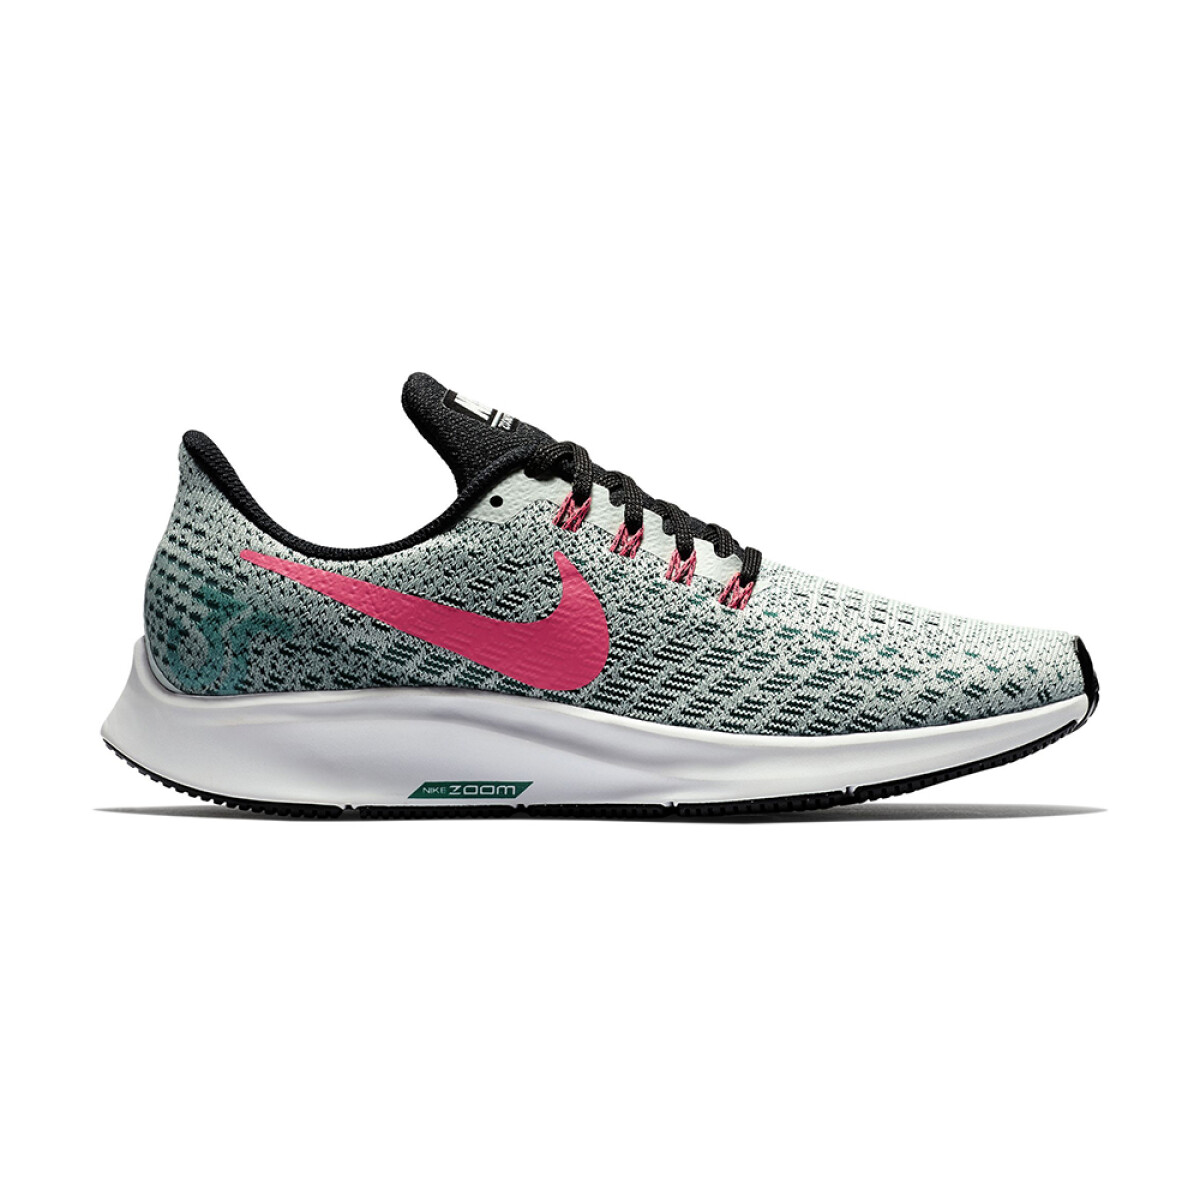 NIKE WMNS AIR ZOOM PEGASUS 35 - BRLY GRY/GEODE/BLK 